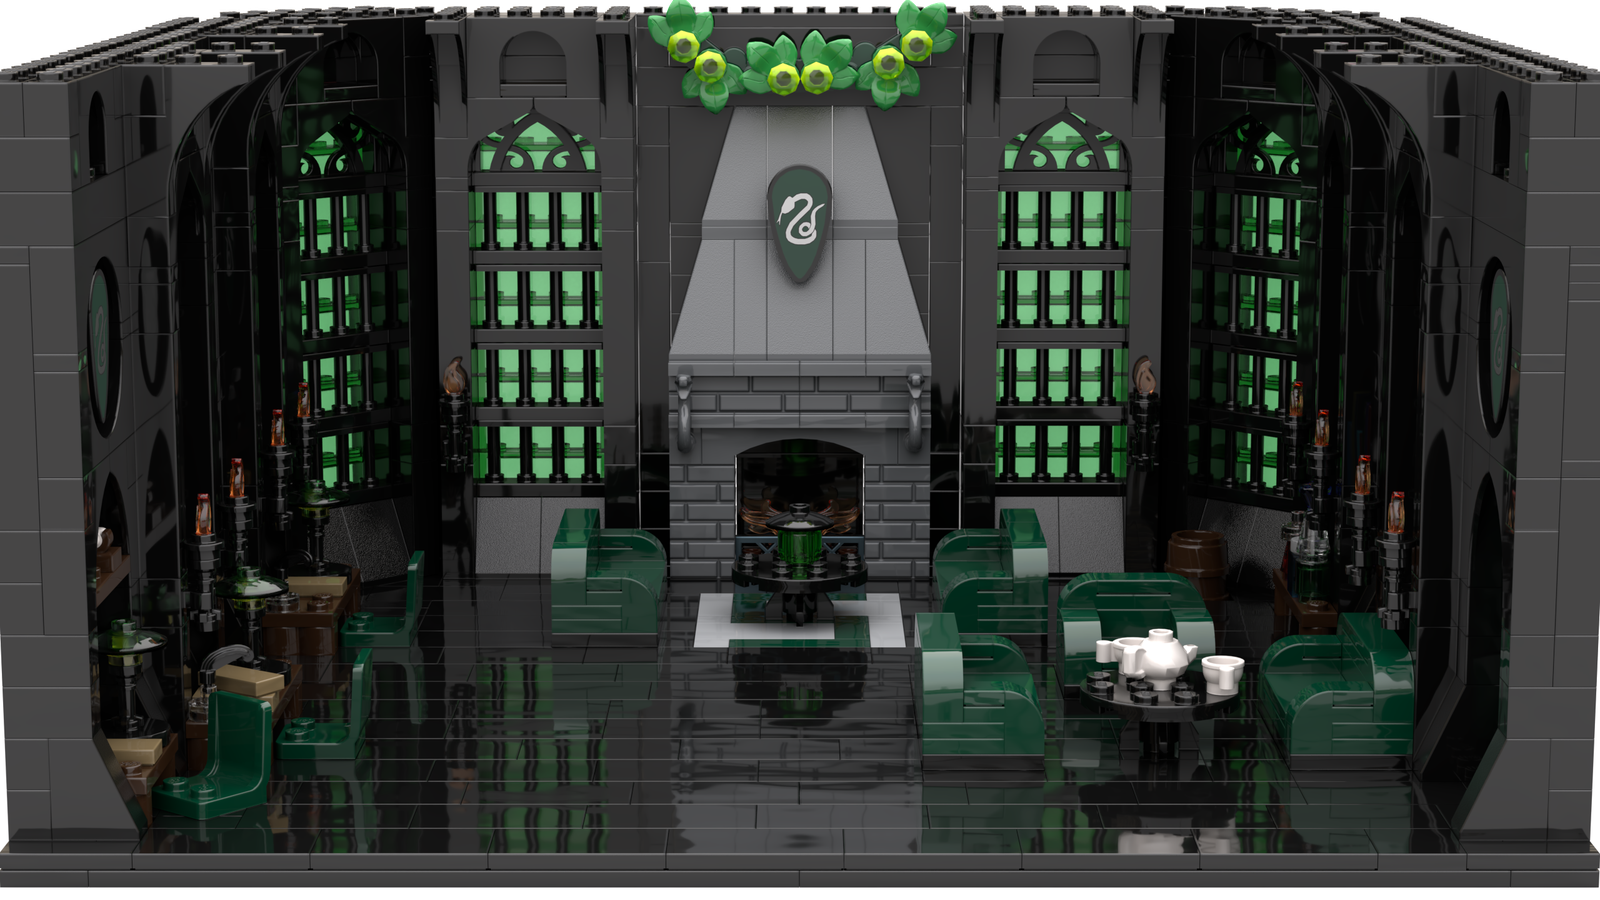 LEGO IDEAS Builds of the Wizarding World Common Room